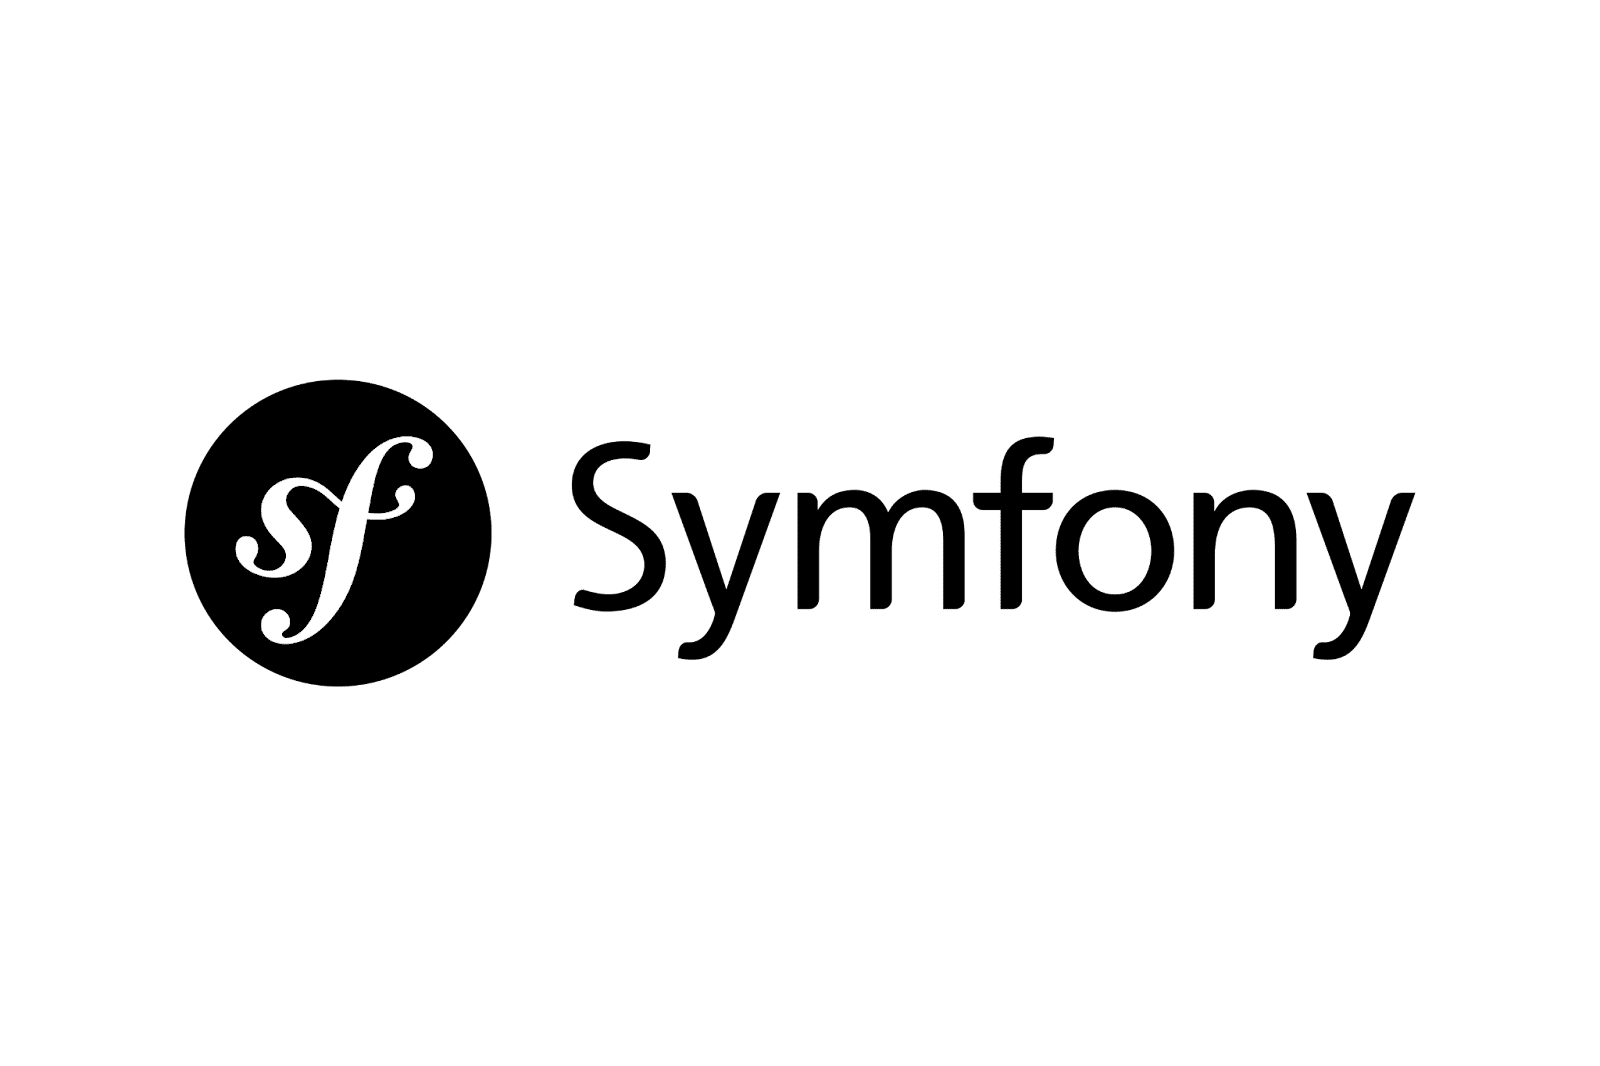 The Symfony logo with the word in black and the initials "sf" in white atop a black circle.